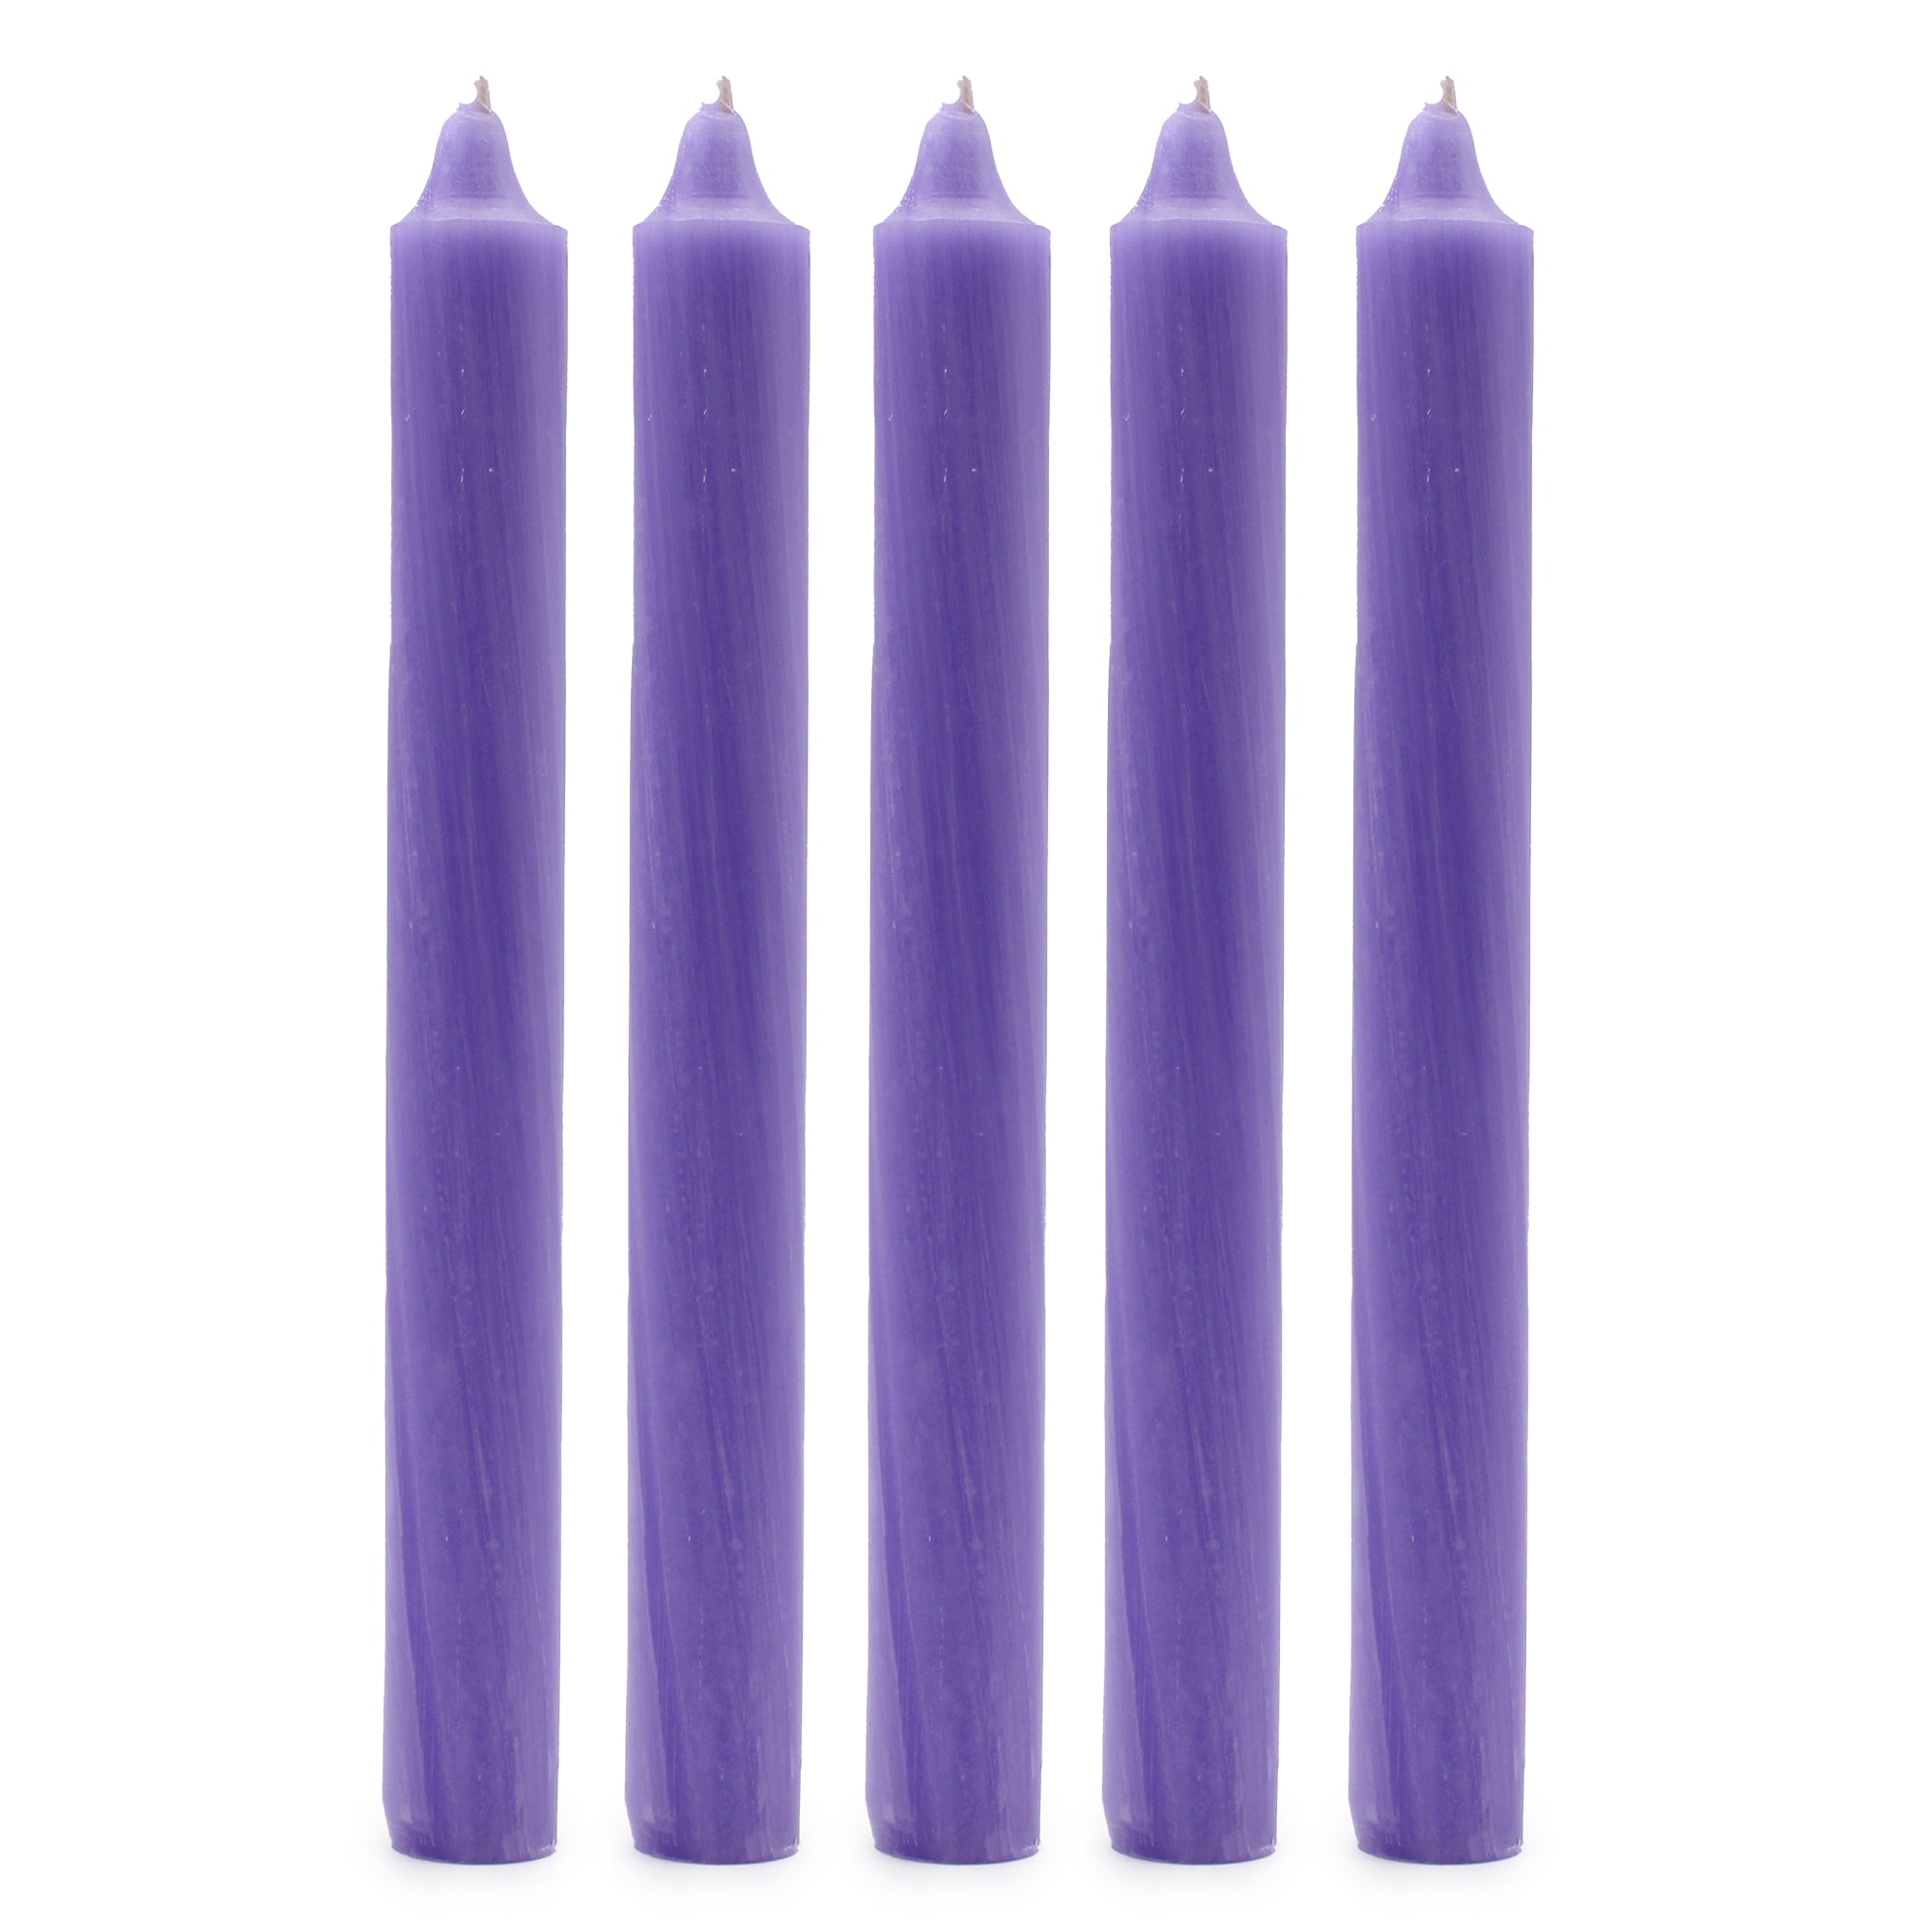 View Solid Colour Dinner Candles Rustic Lilac Pack of 5 information